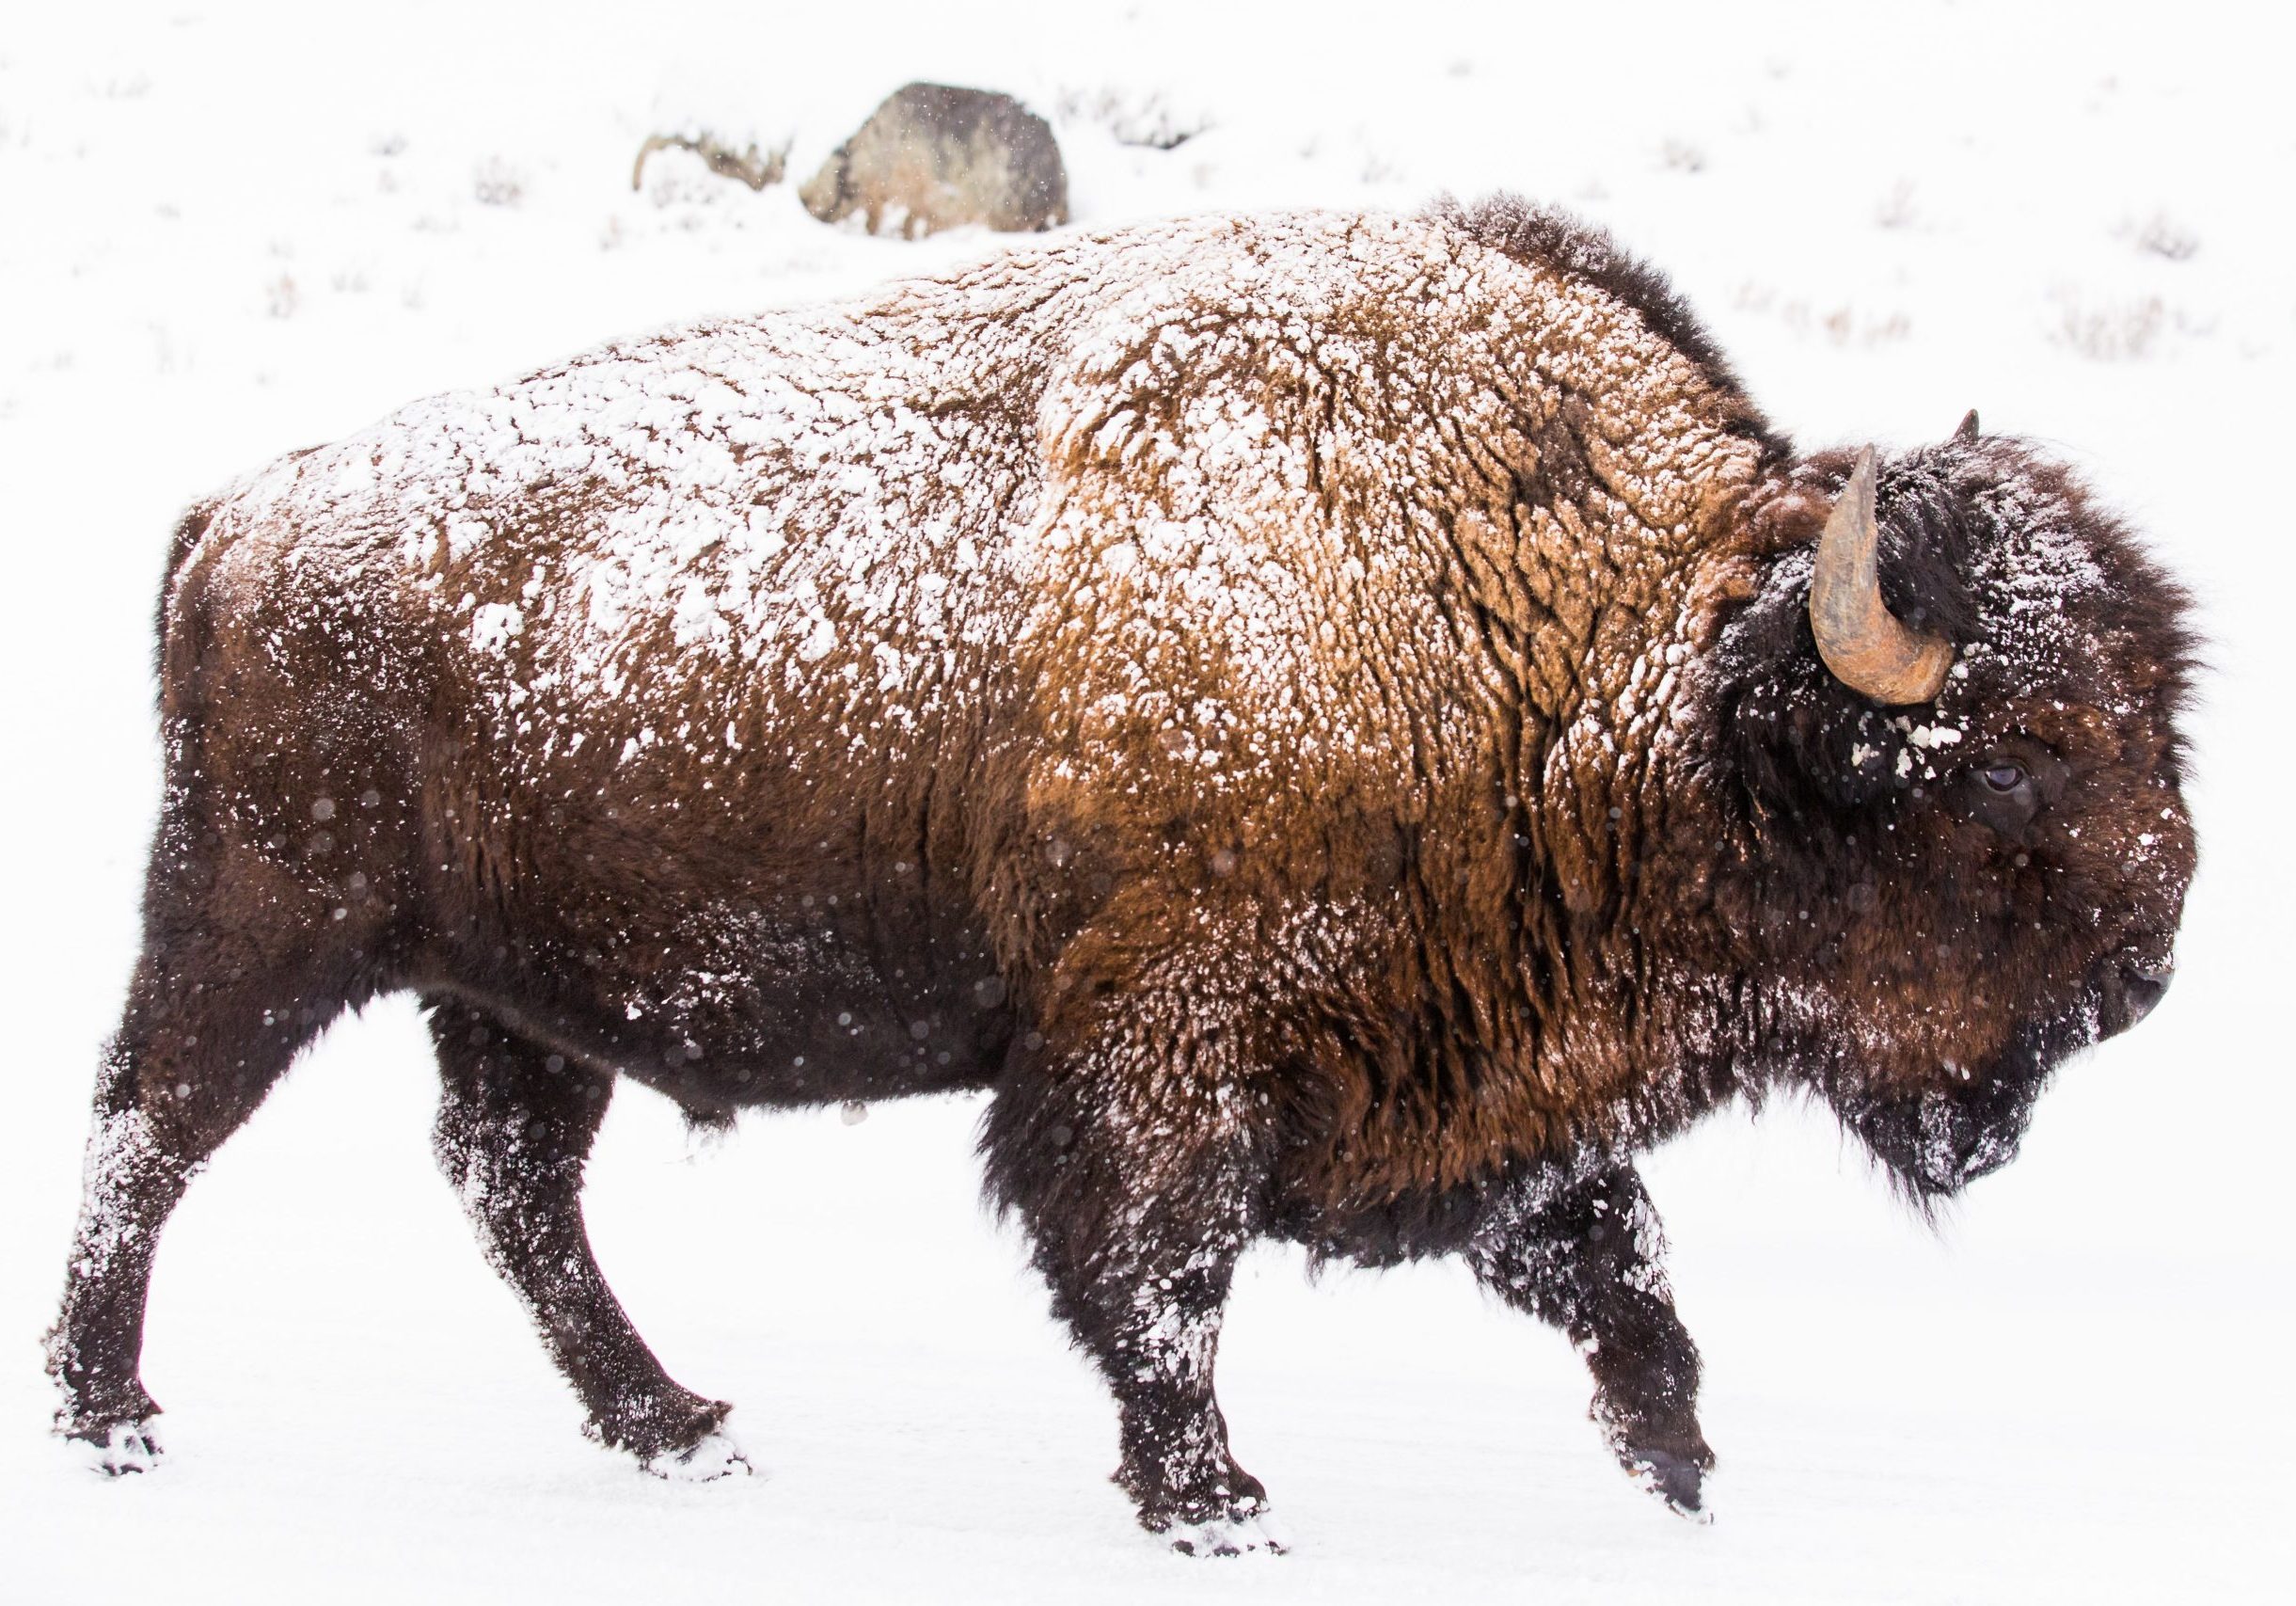 bison walking through snow with snow covered back